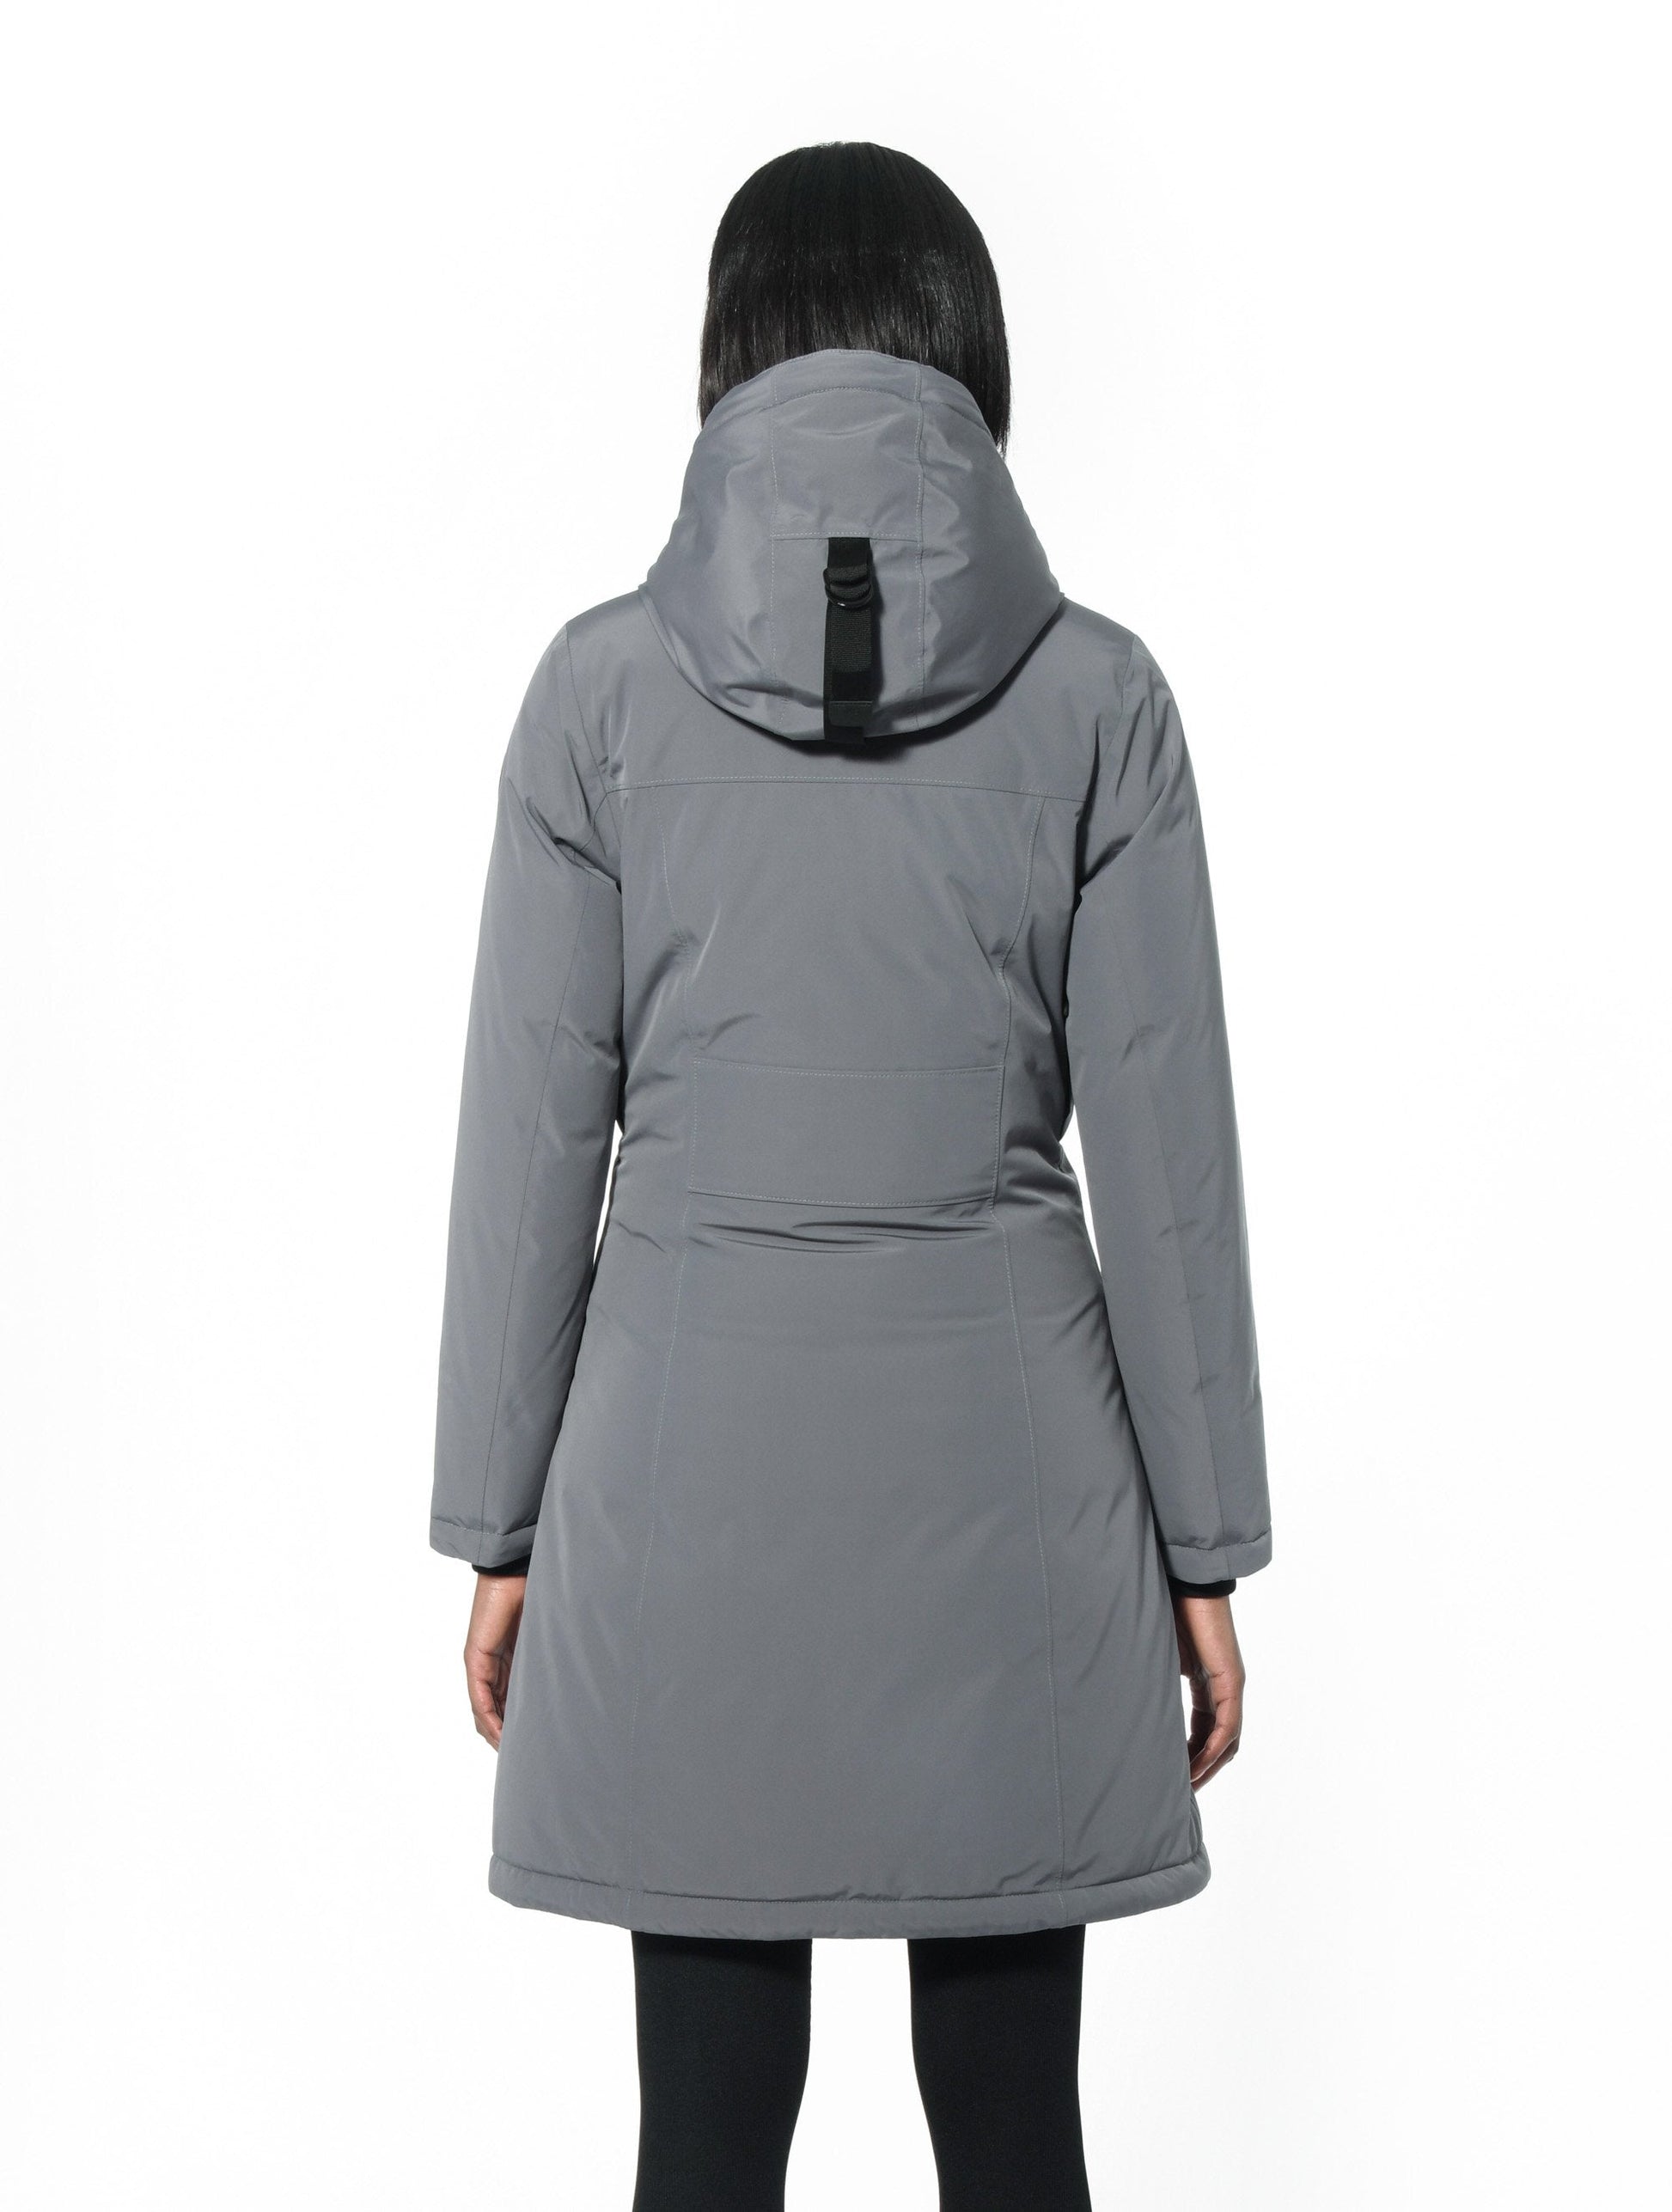 Ladies thigh length down-filled parka with non-removable hood in Concrete